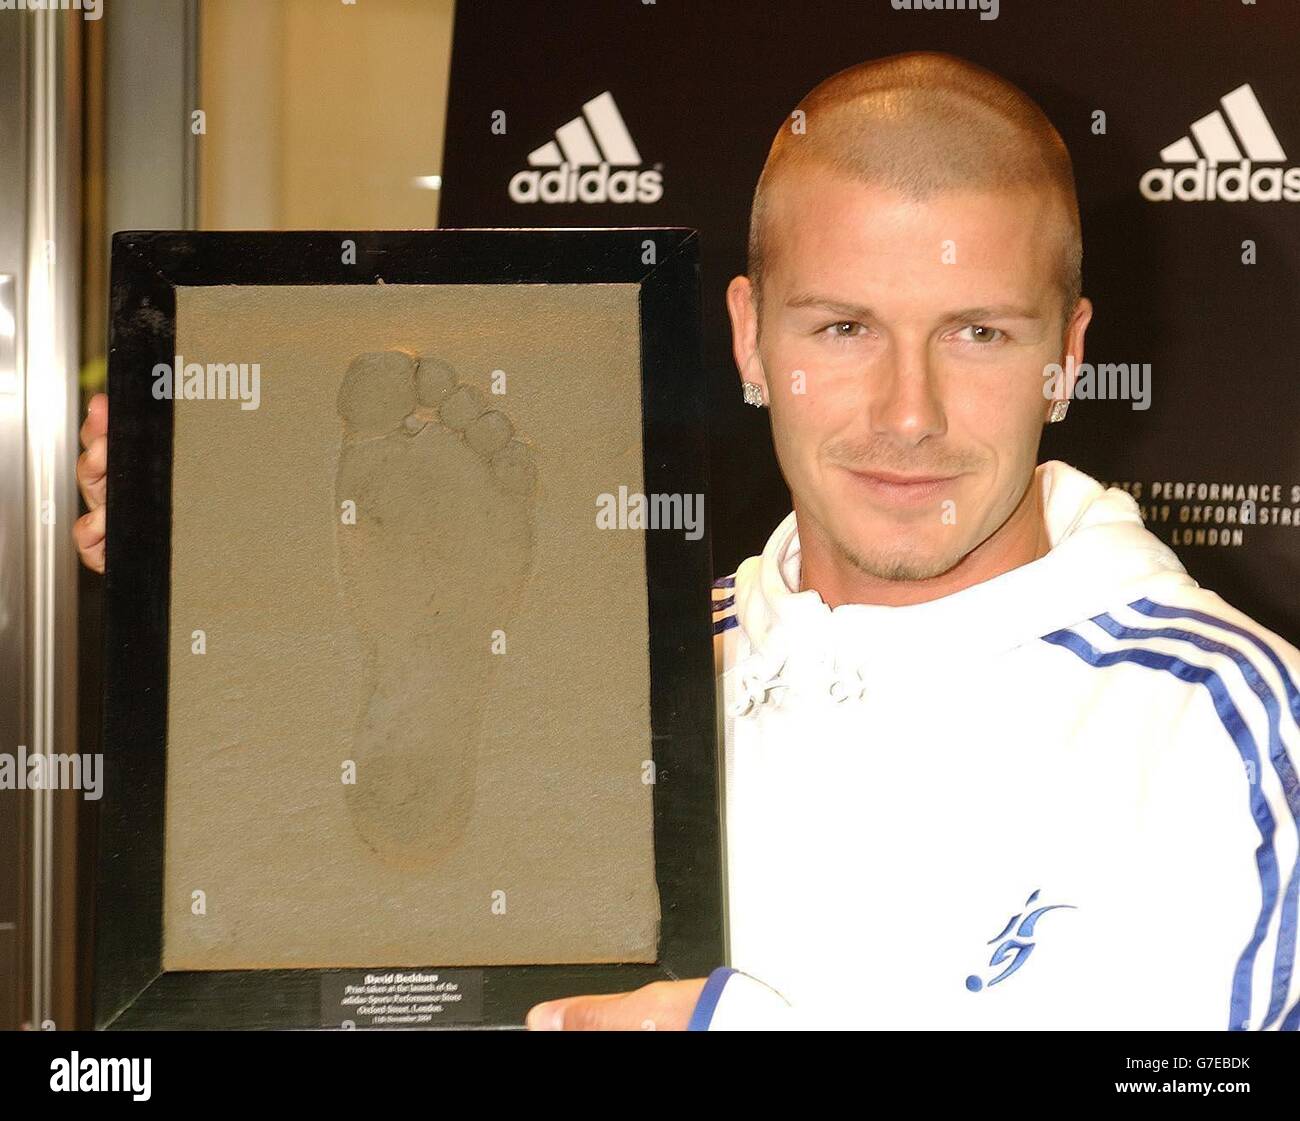 Real Madrid and England footballer David Beckham with a concrete cast of  his right foot, made at the Adidas store in Oxford Street, London. The  Adidas store opens to the public for